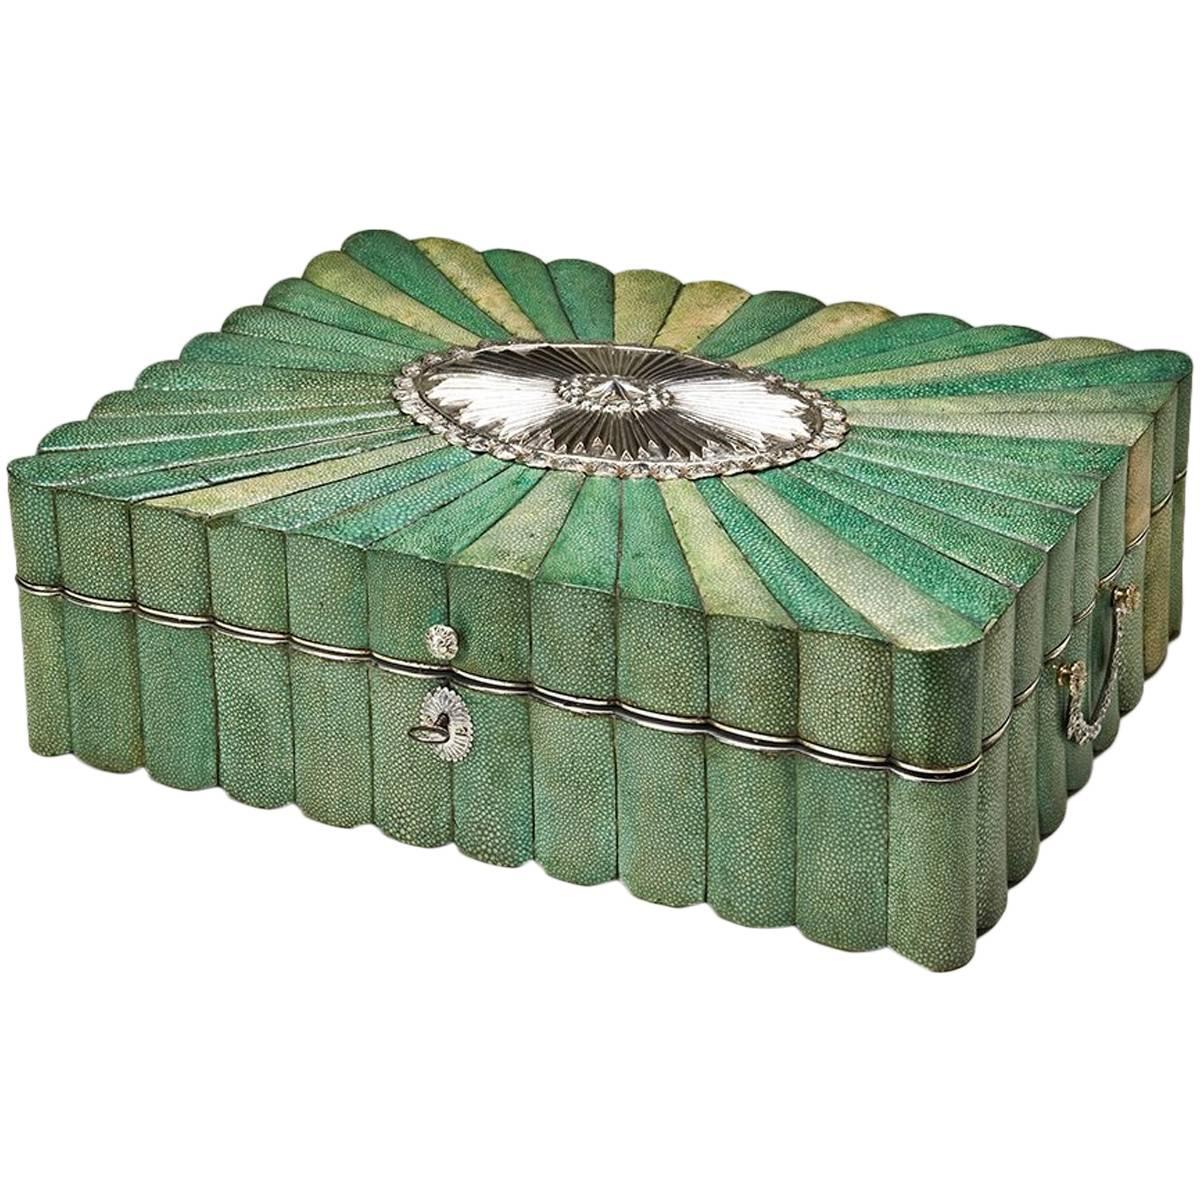 Shagreen and Silver-Gilt Casket, Louis XVI Period, French or Russian